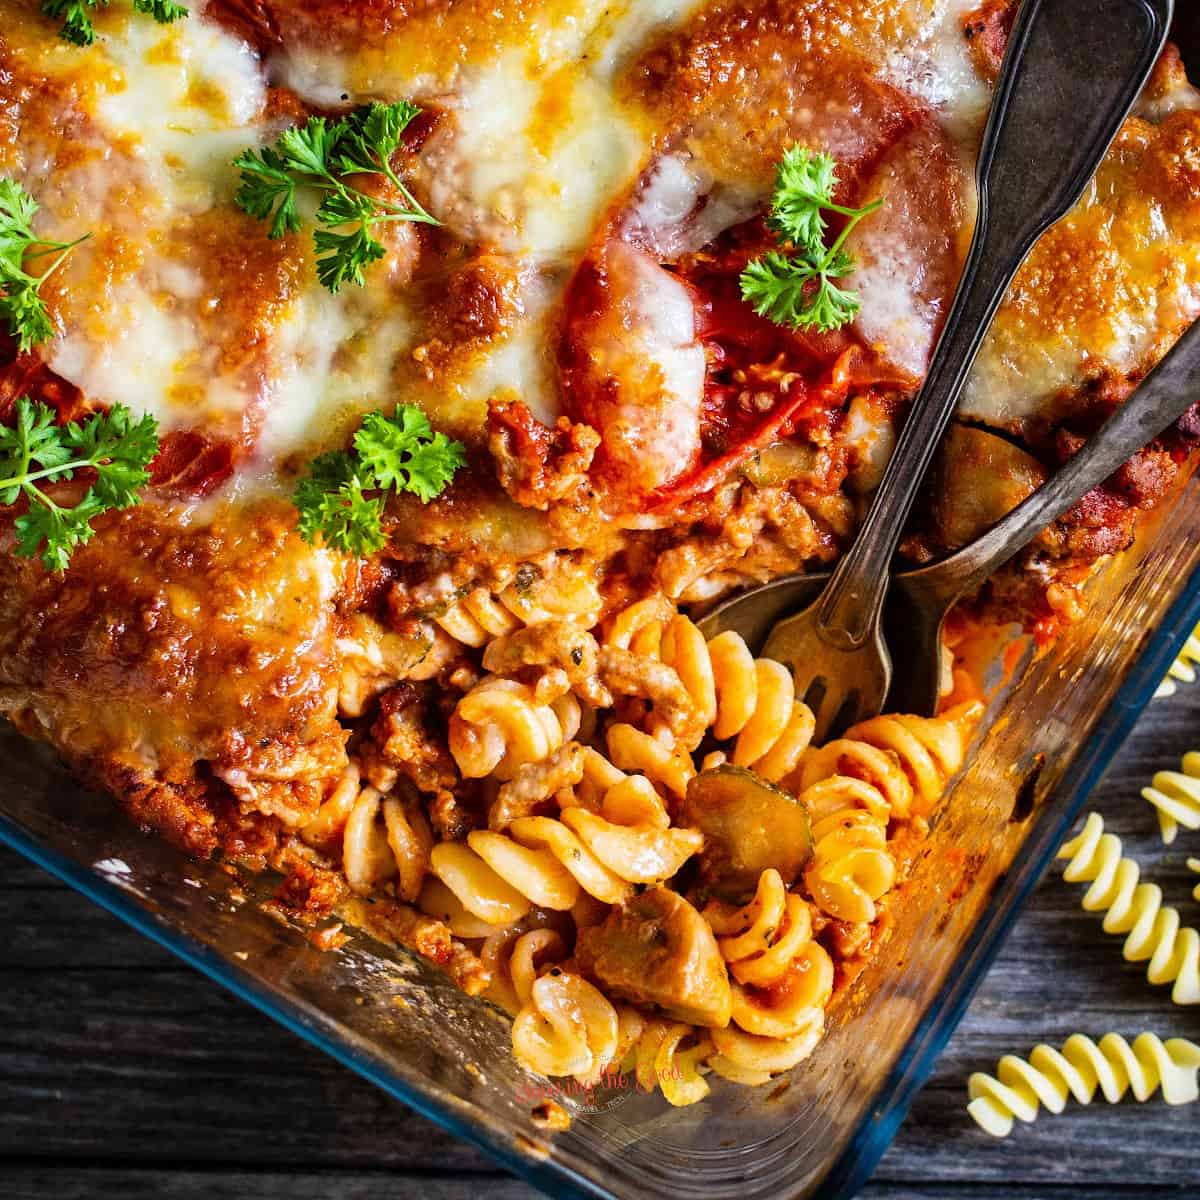 35 Best Casserole Recipes With Ground Beef.